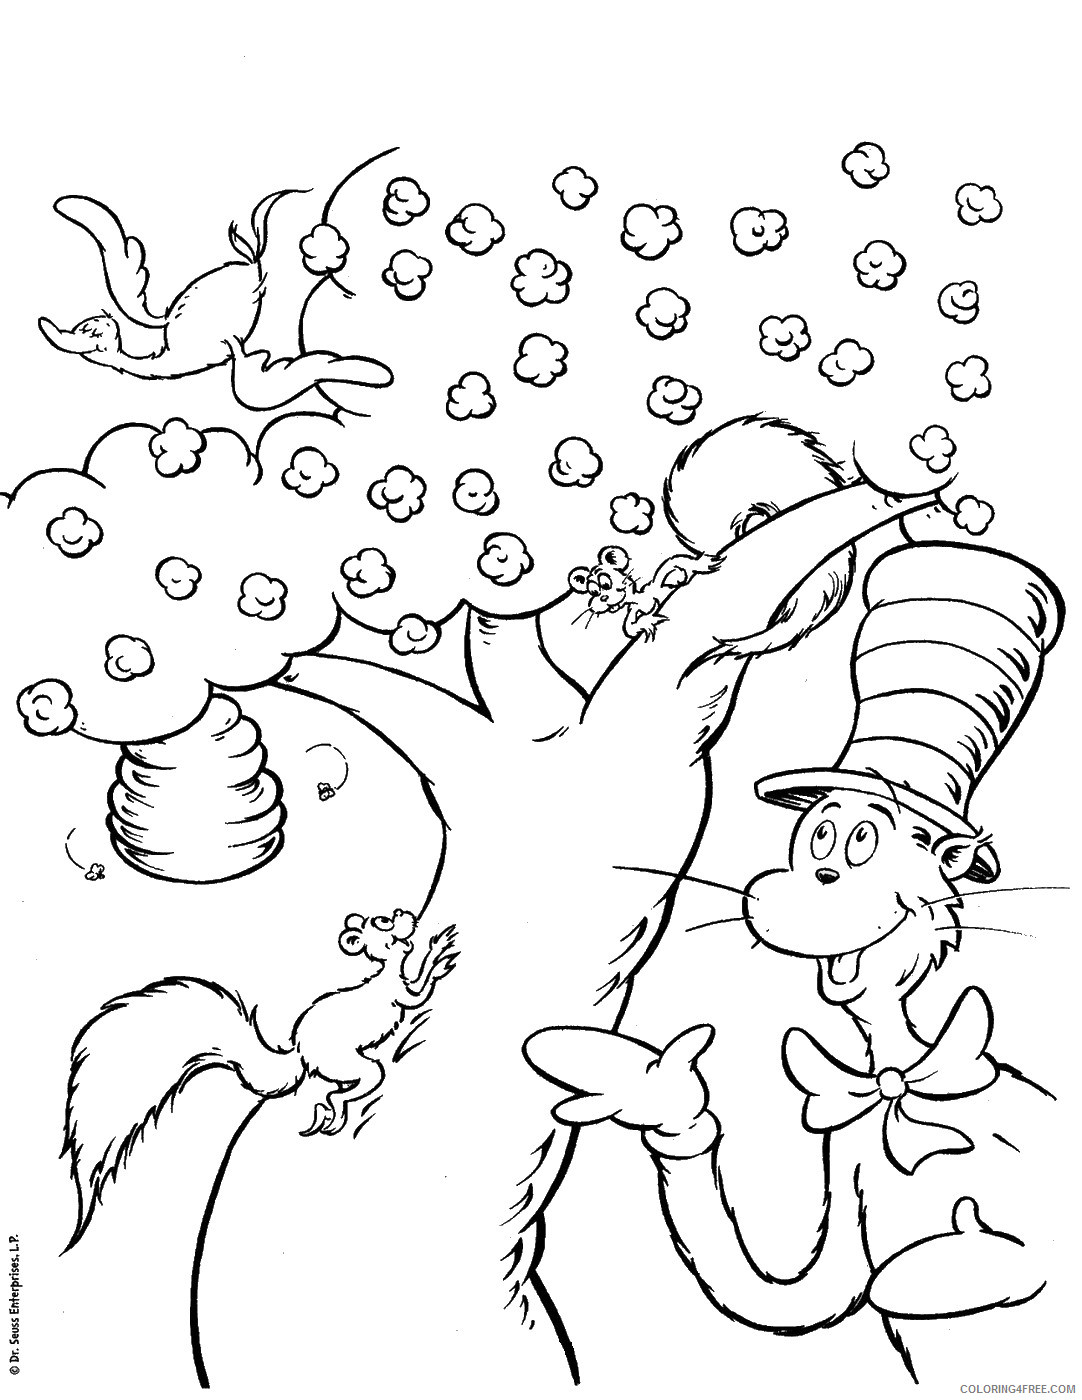 The Cat in the Hat Coloring Pages Cartoons cat_hat_cl_04 Printable 2020 6376 Coloring4free